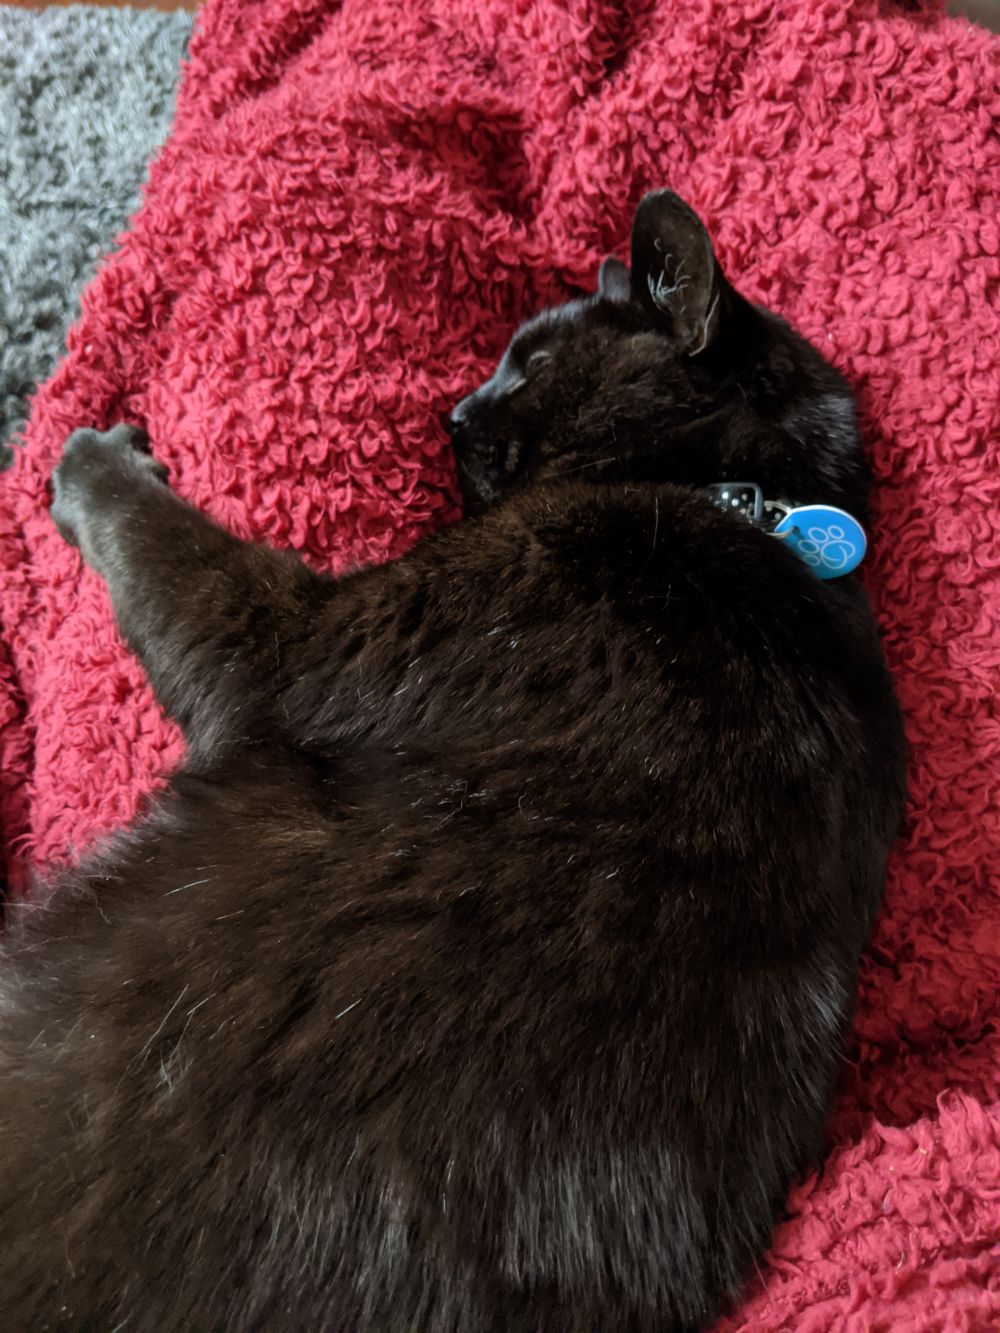 Black cat snuggled in between Jamie's outstretched legs, on a red blanket